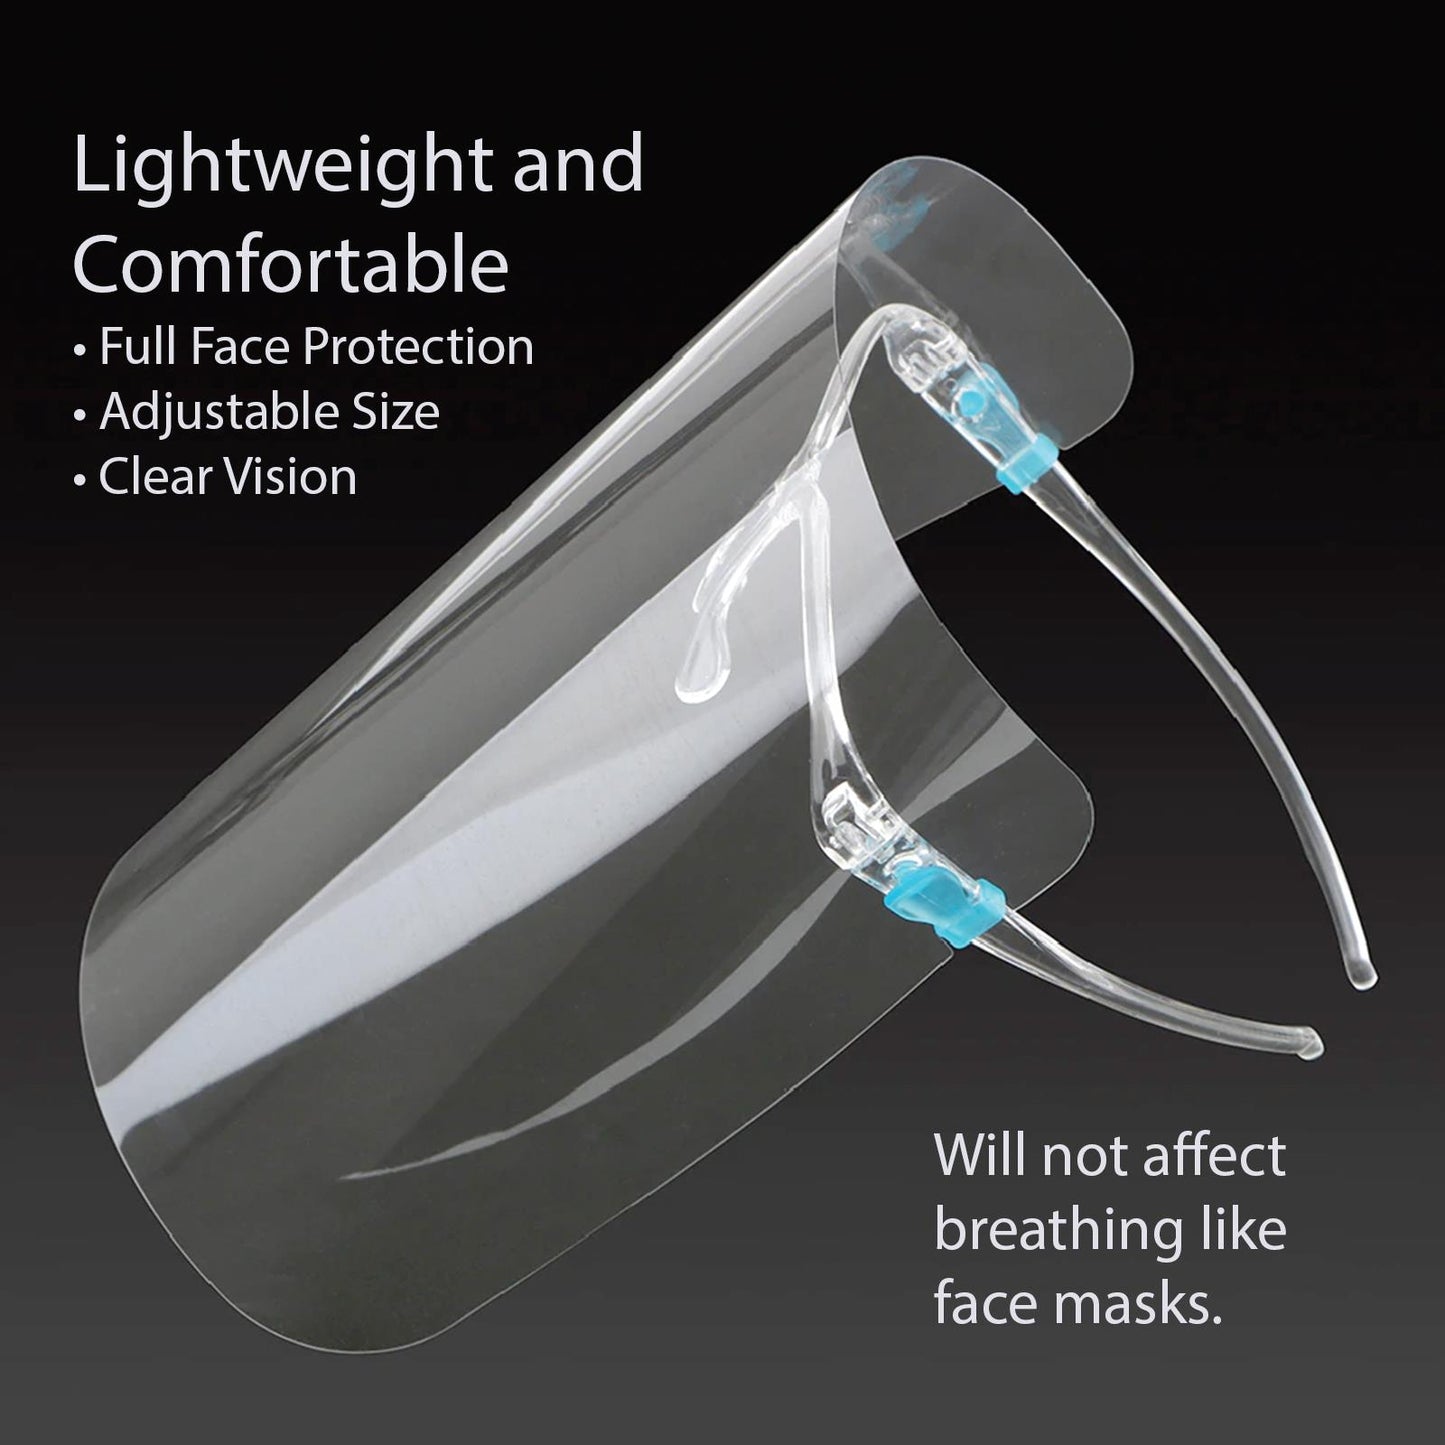 Spectacle Face Shield Mask